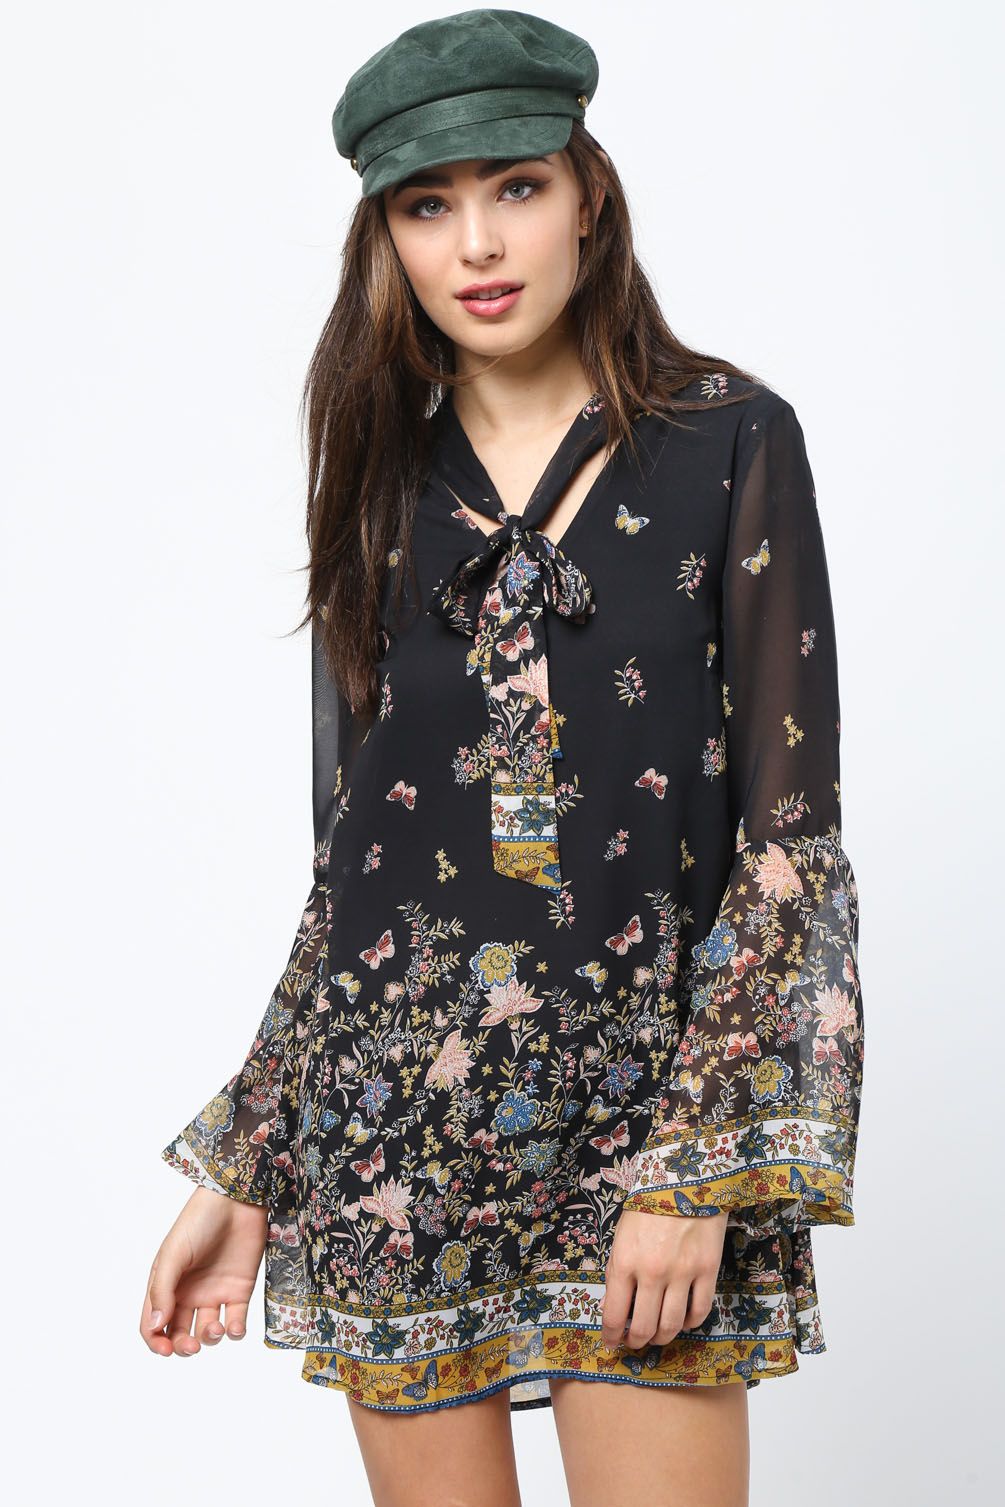 black floral dress with bell sleeves